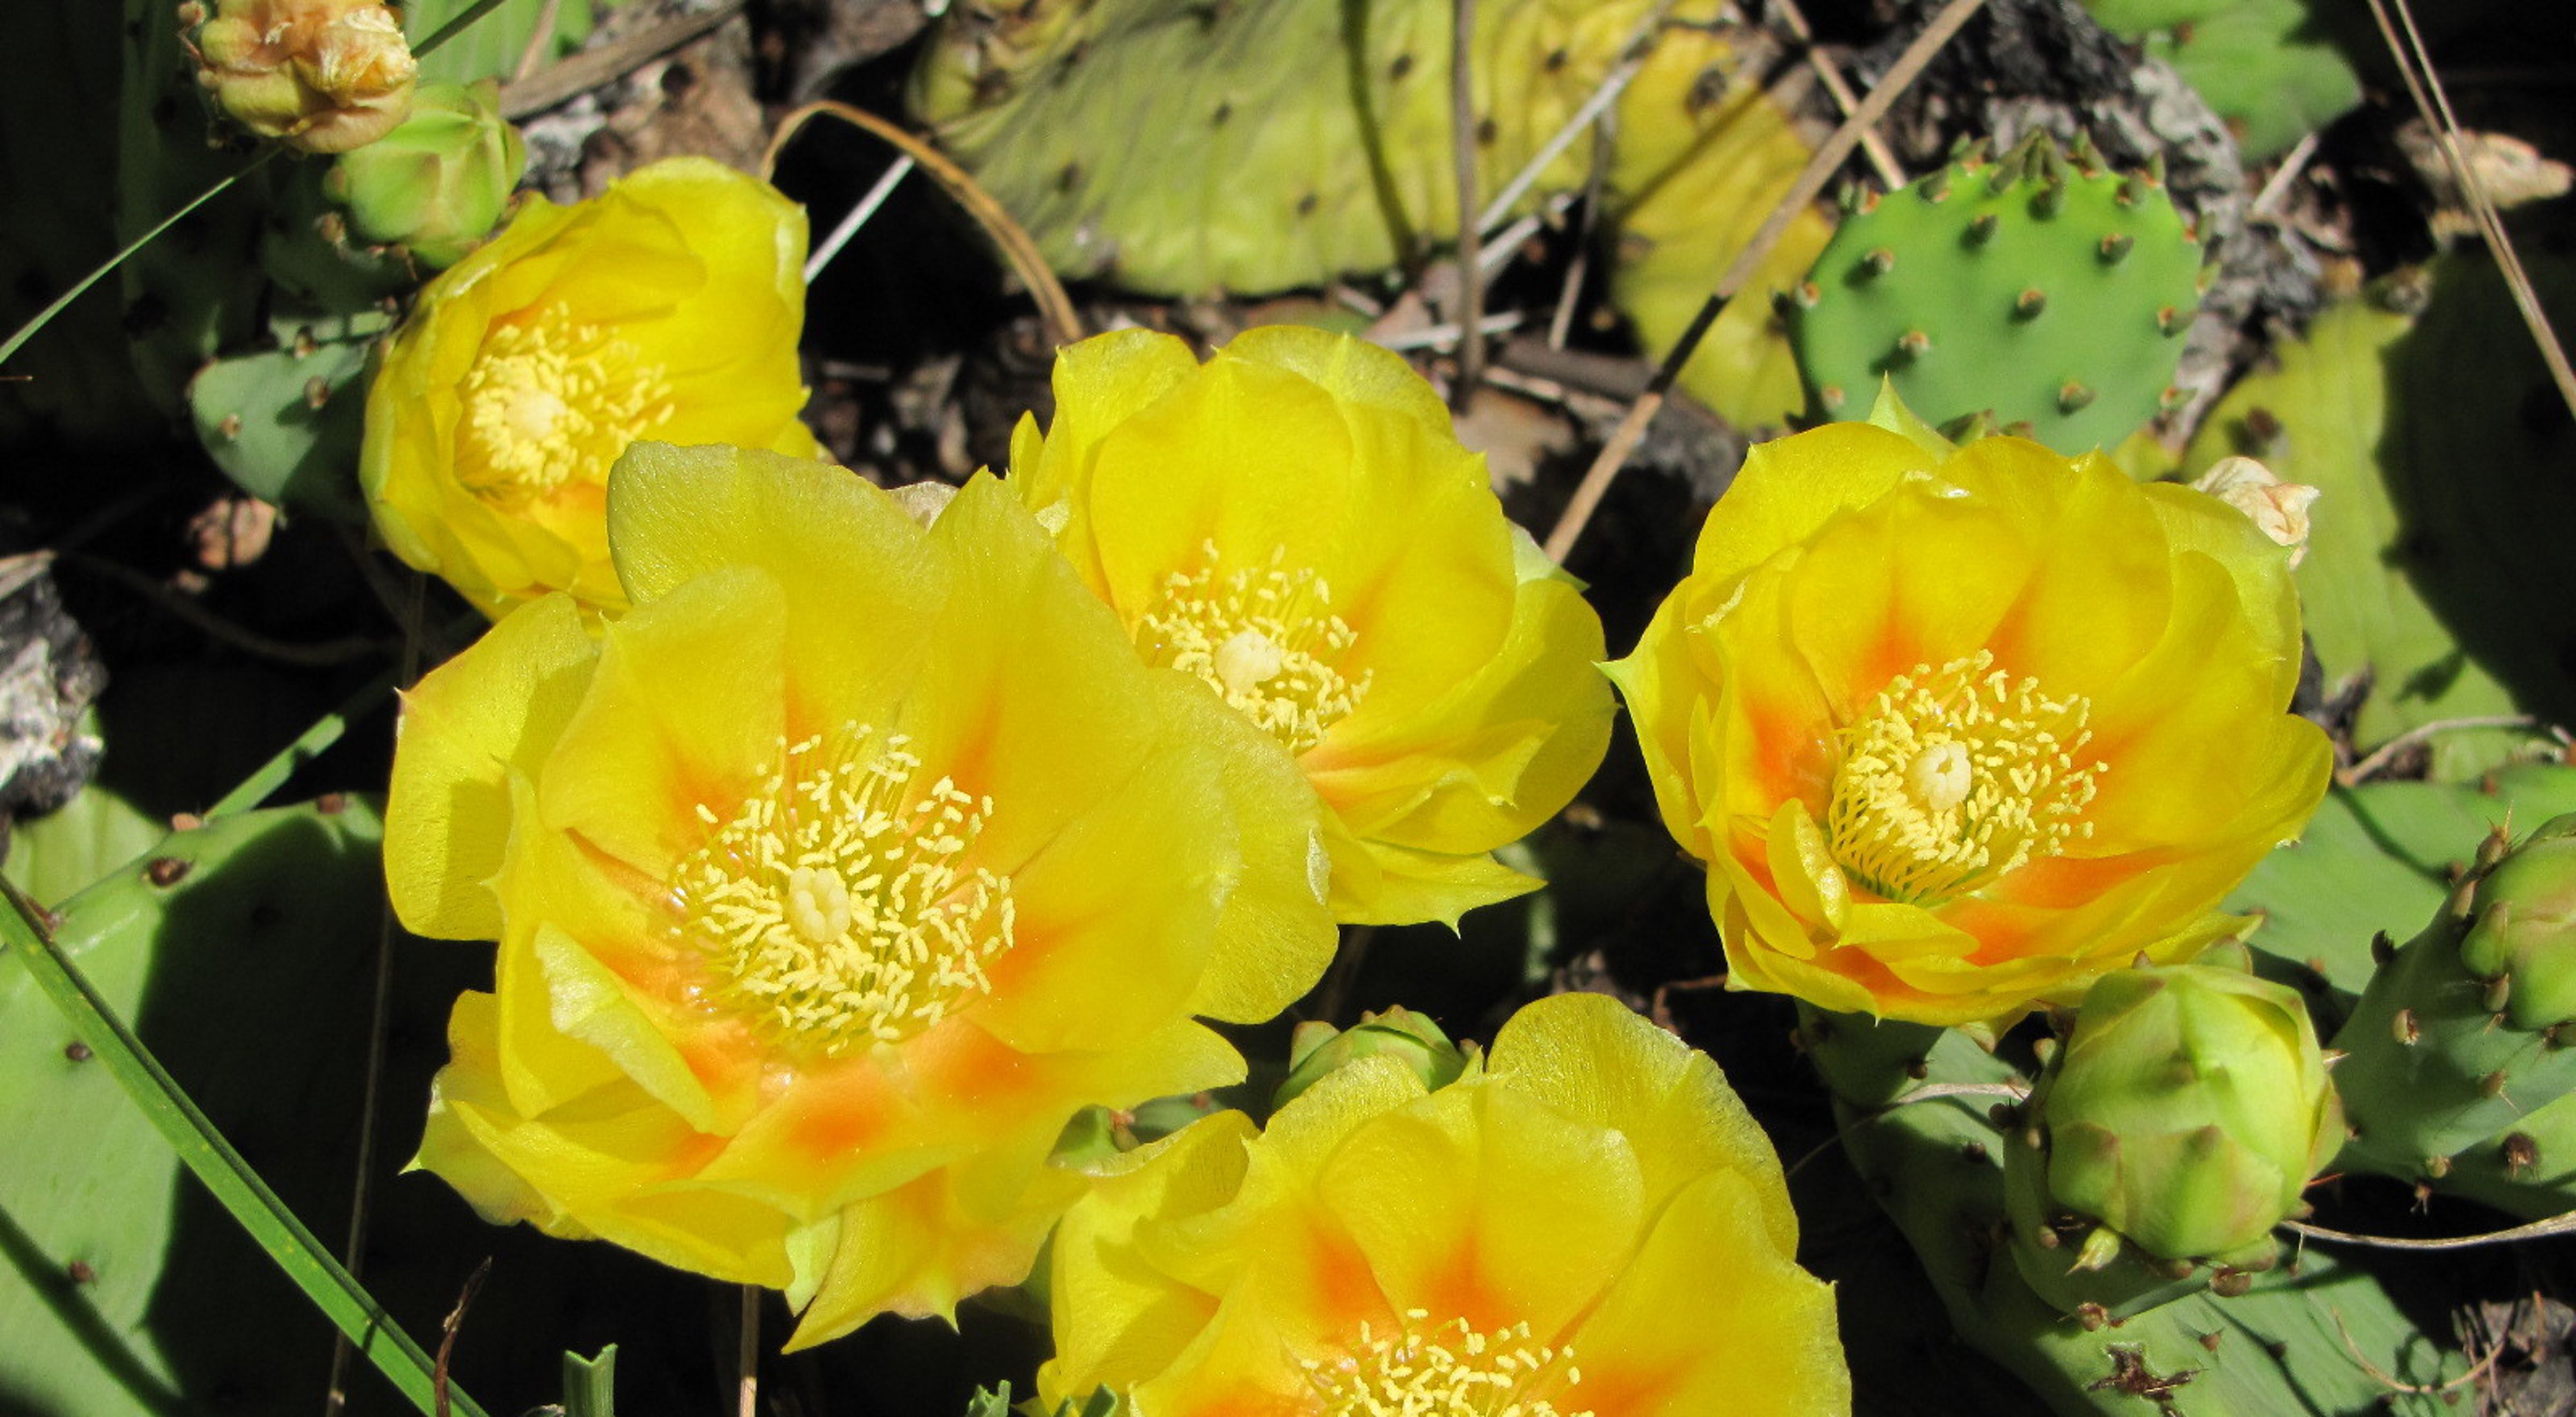 Closeup of the bright yellow flowers of an Eastern prickly pear cactus in bloom.